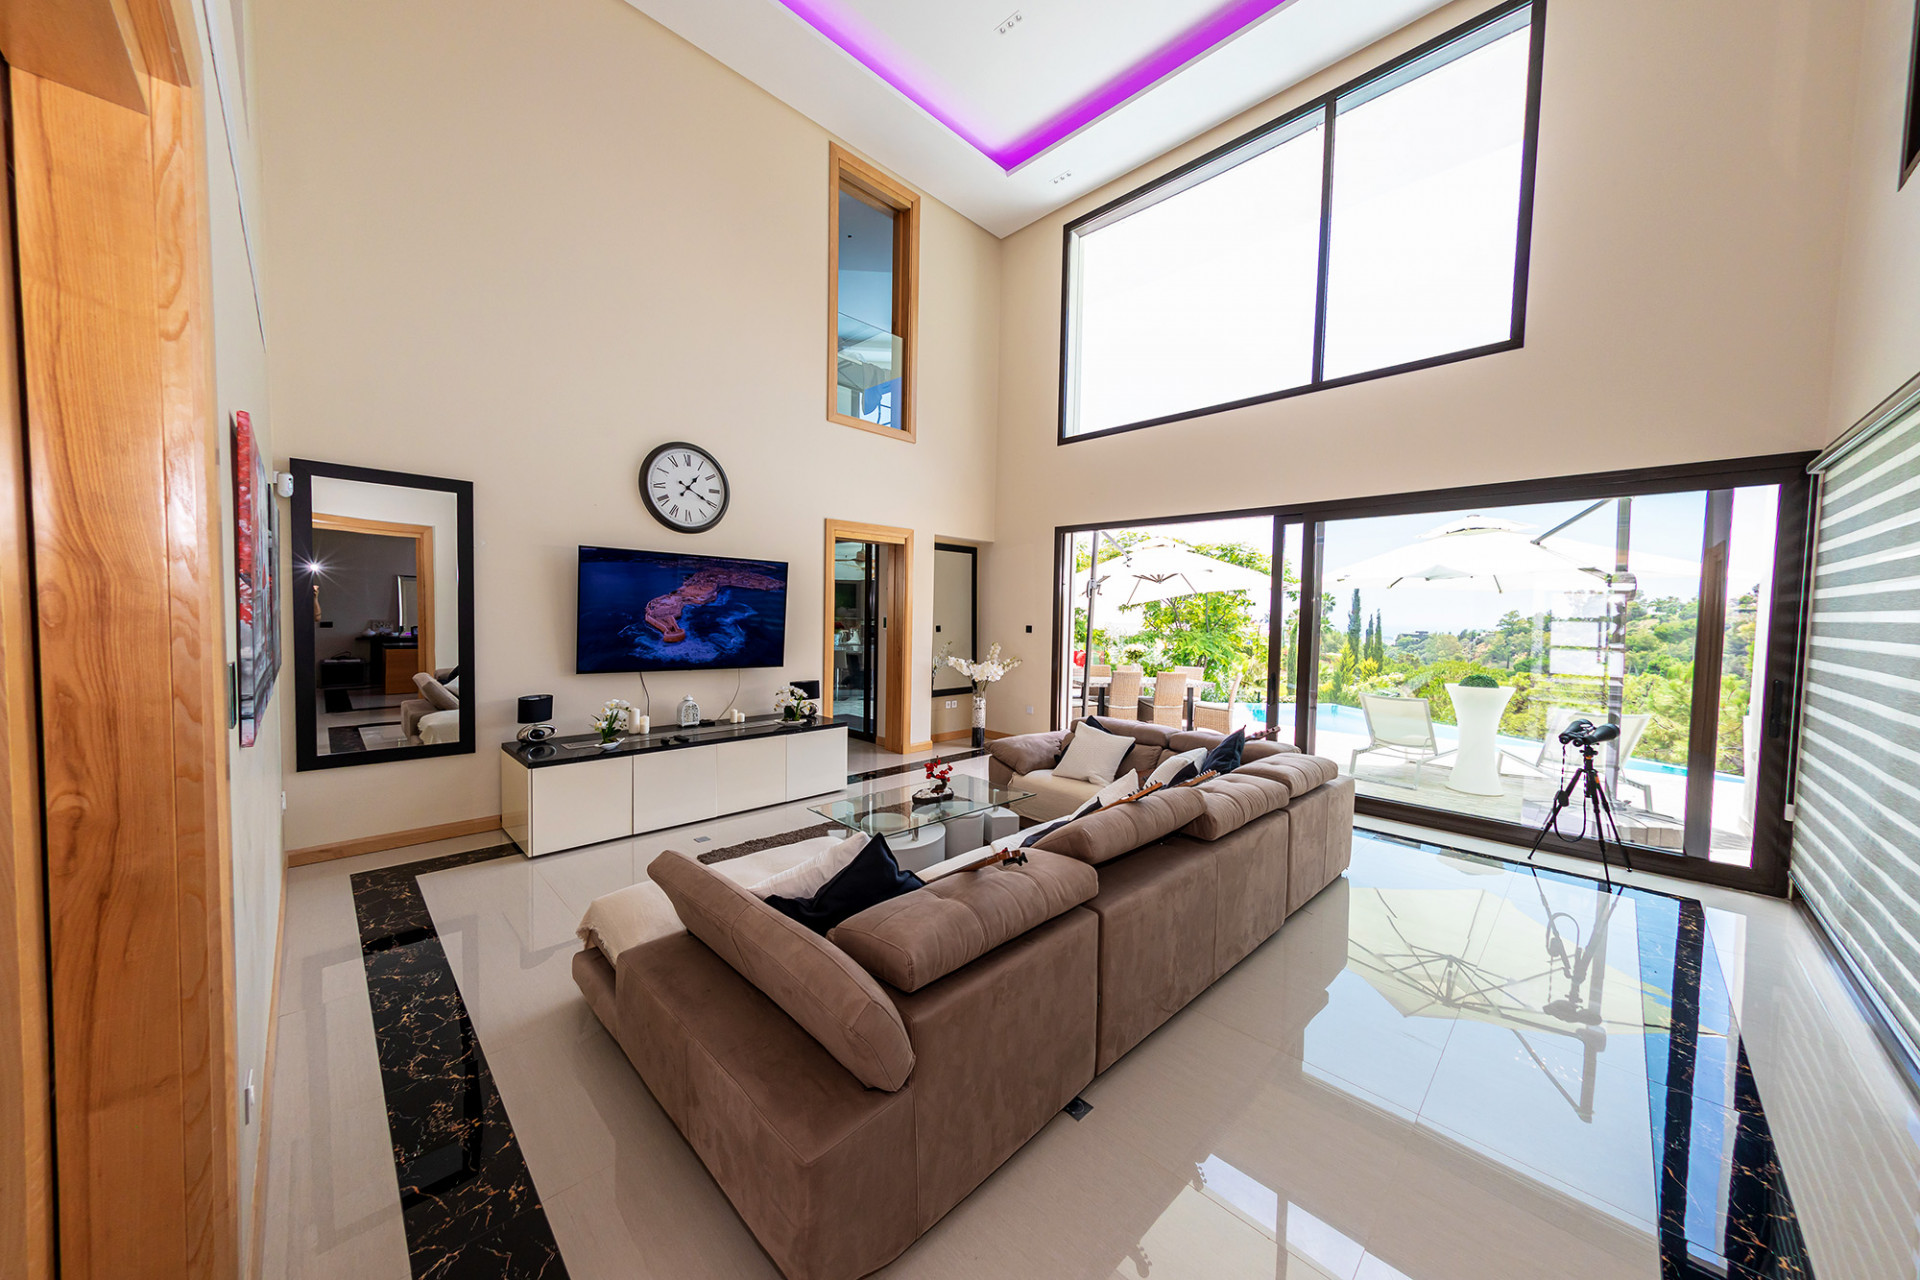 Spectacular south facing villa situated in front of the exclusive golf course of La Quinta